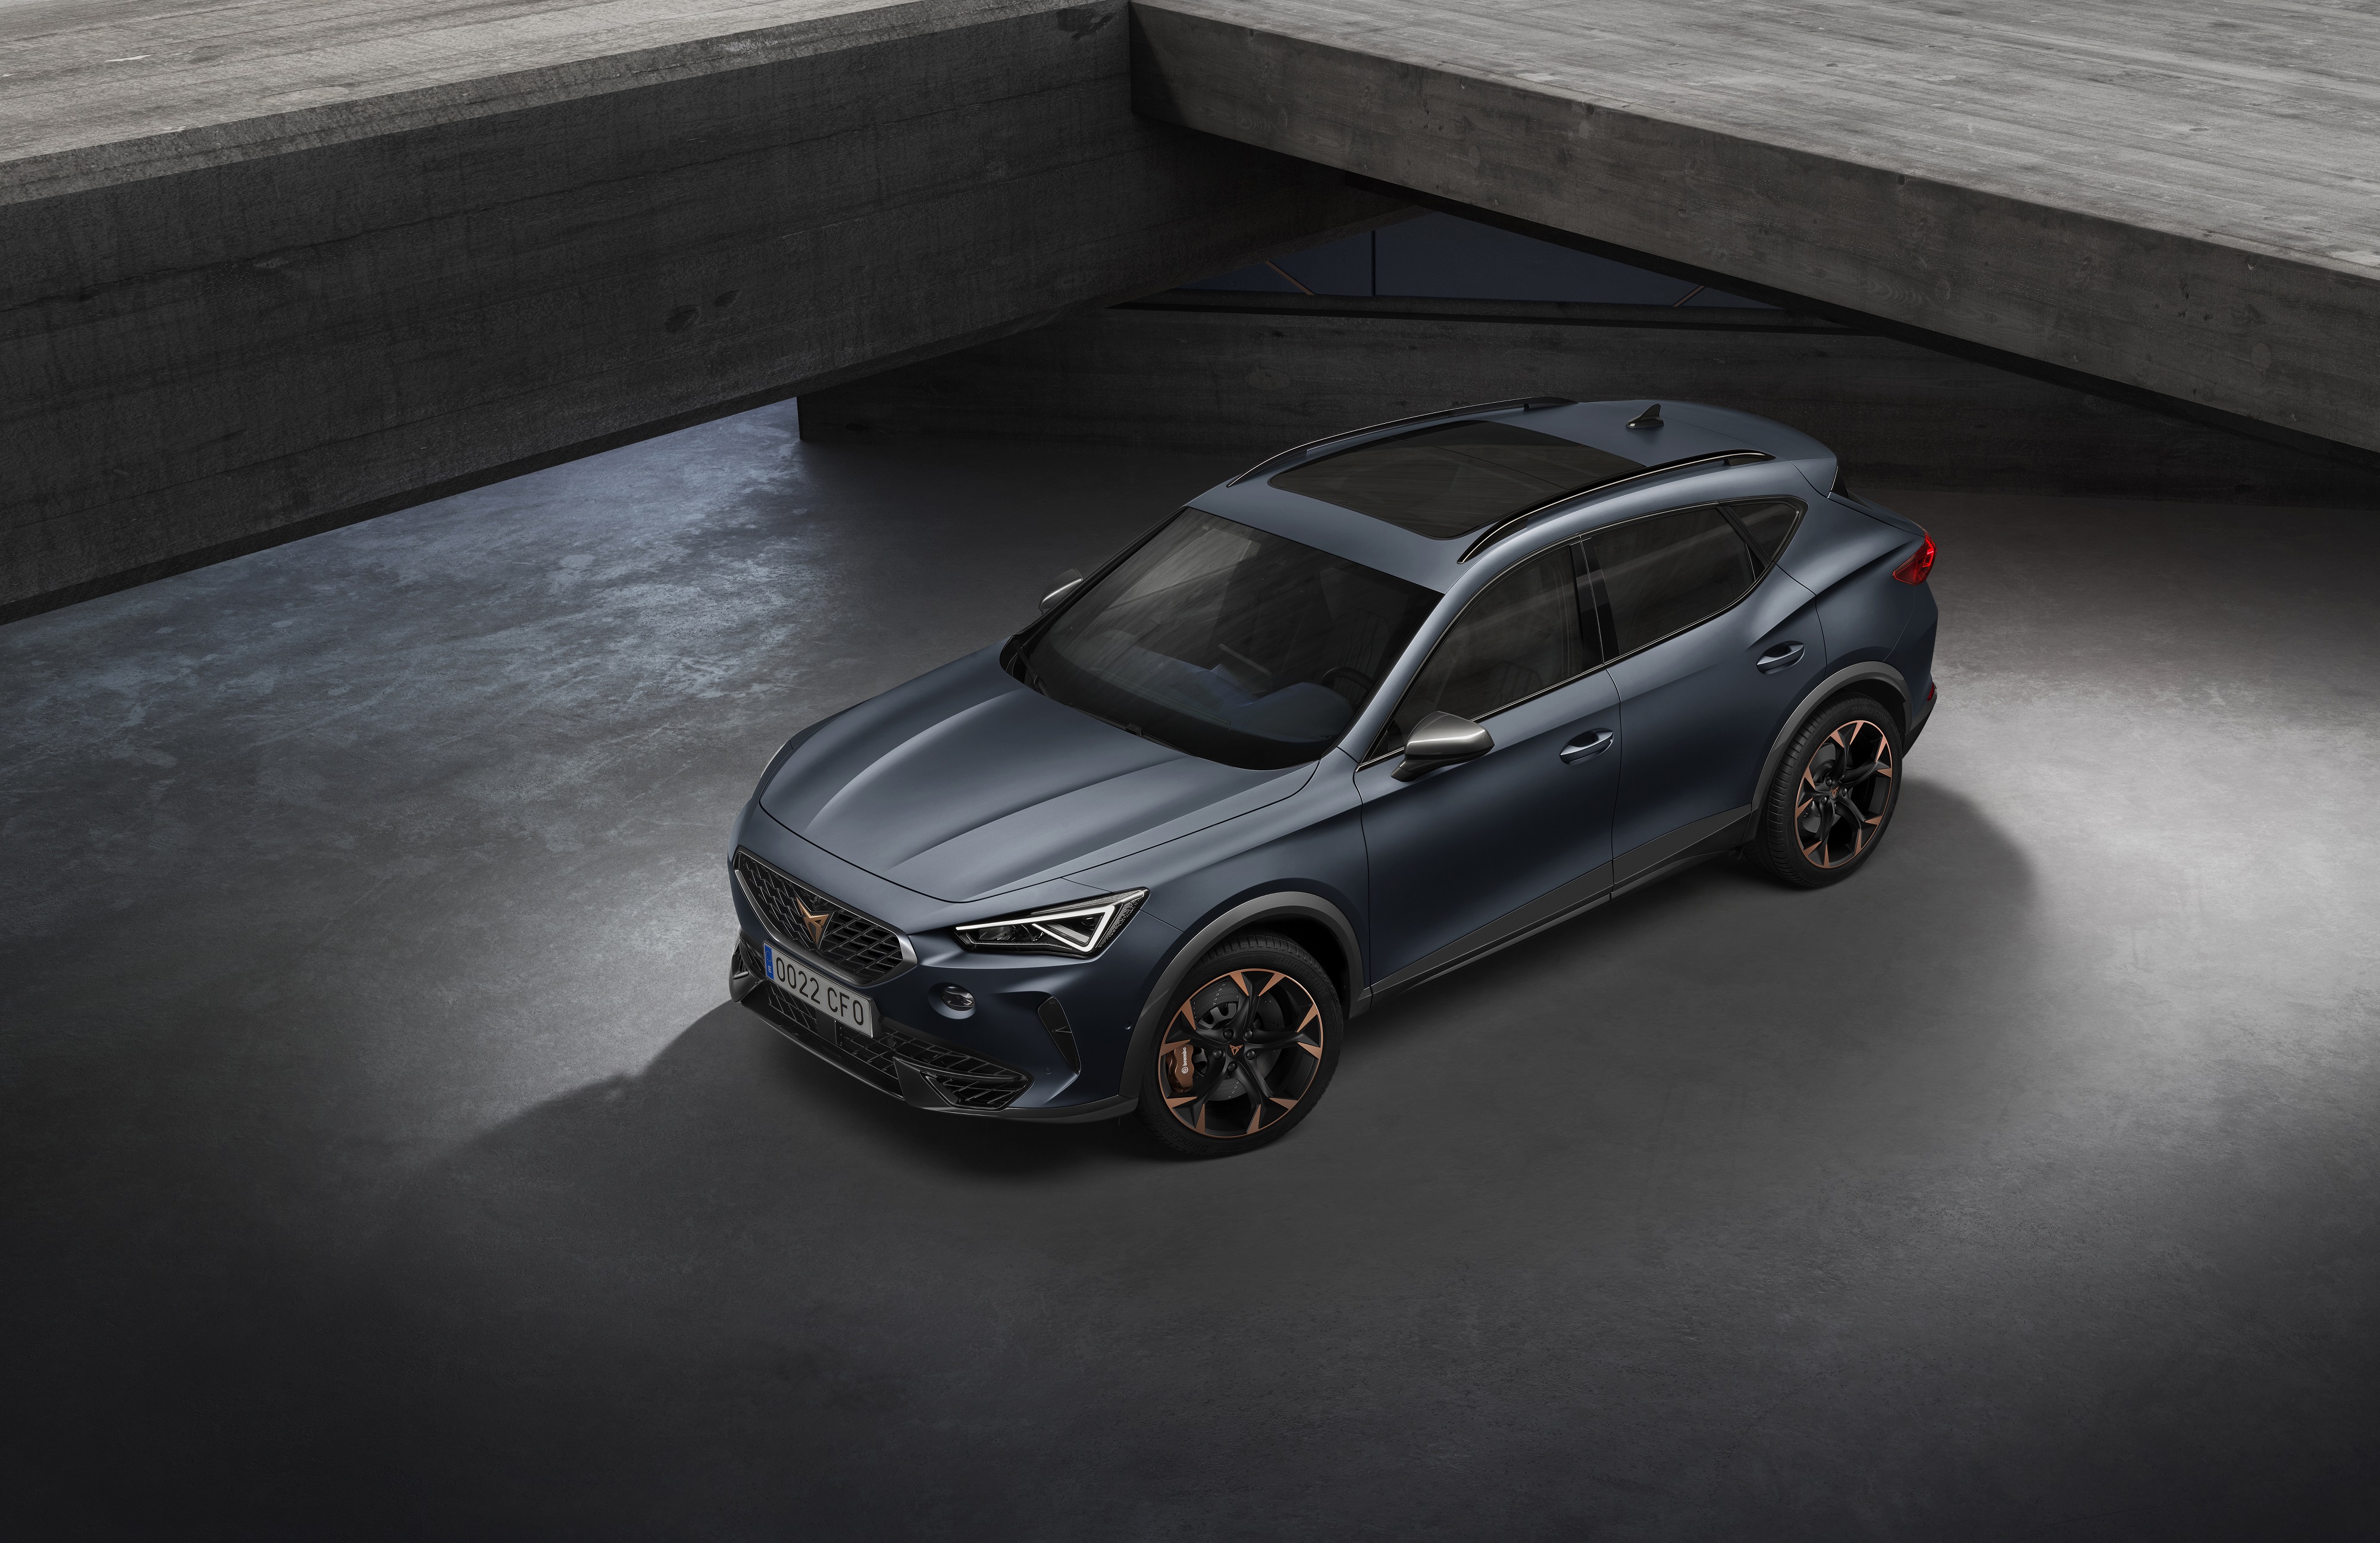 cupra-formentor-wins-the-red-dot-award-for-product-design-2021-01_hq.jpg